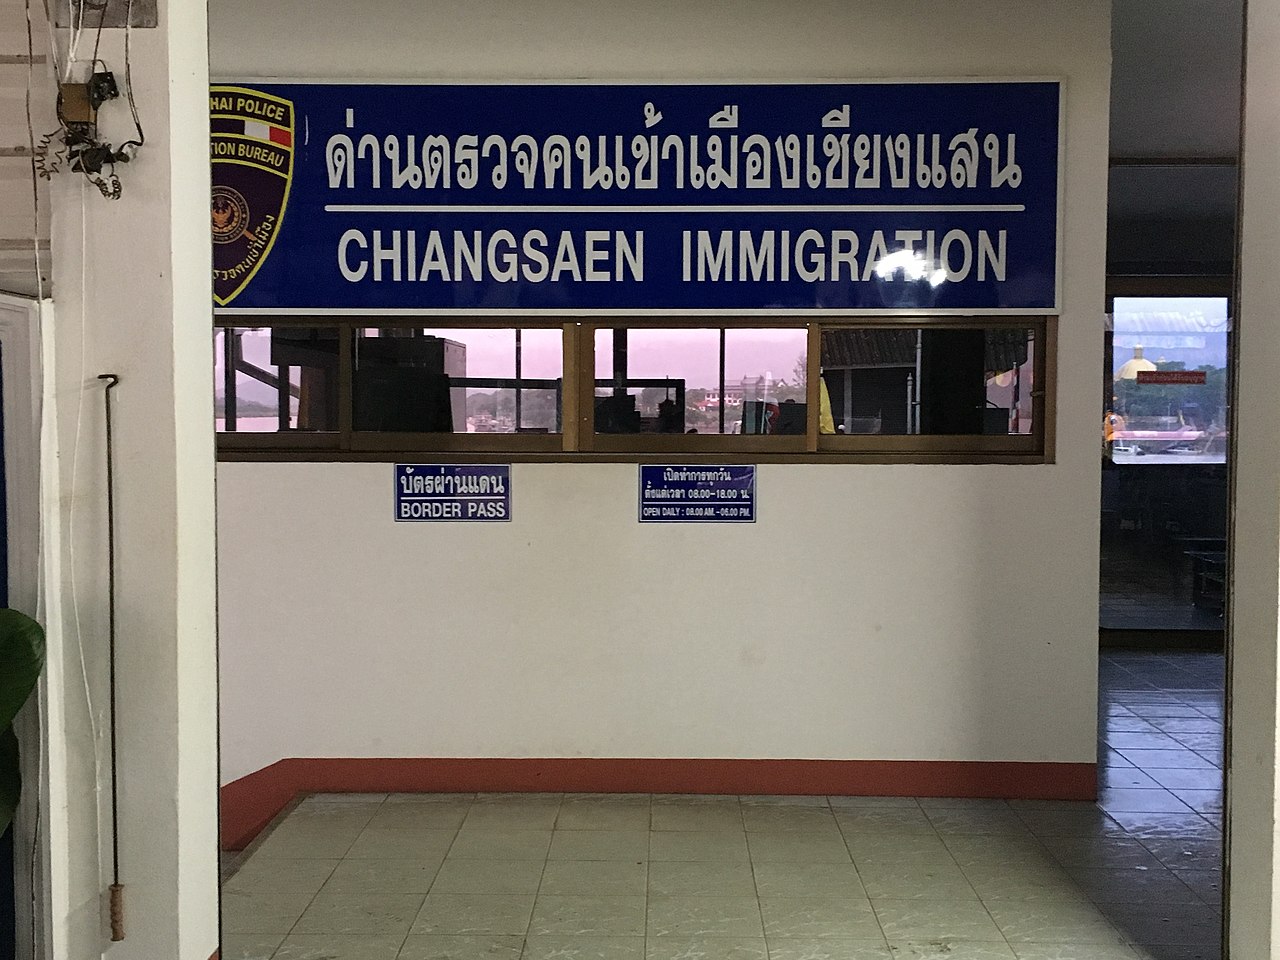 Chiang Saen Immigration Thailand-Myanmar Border Crossing Checkpoint in Chiang Rai